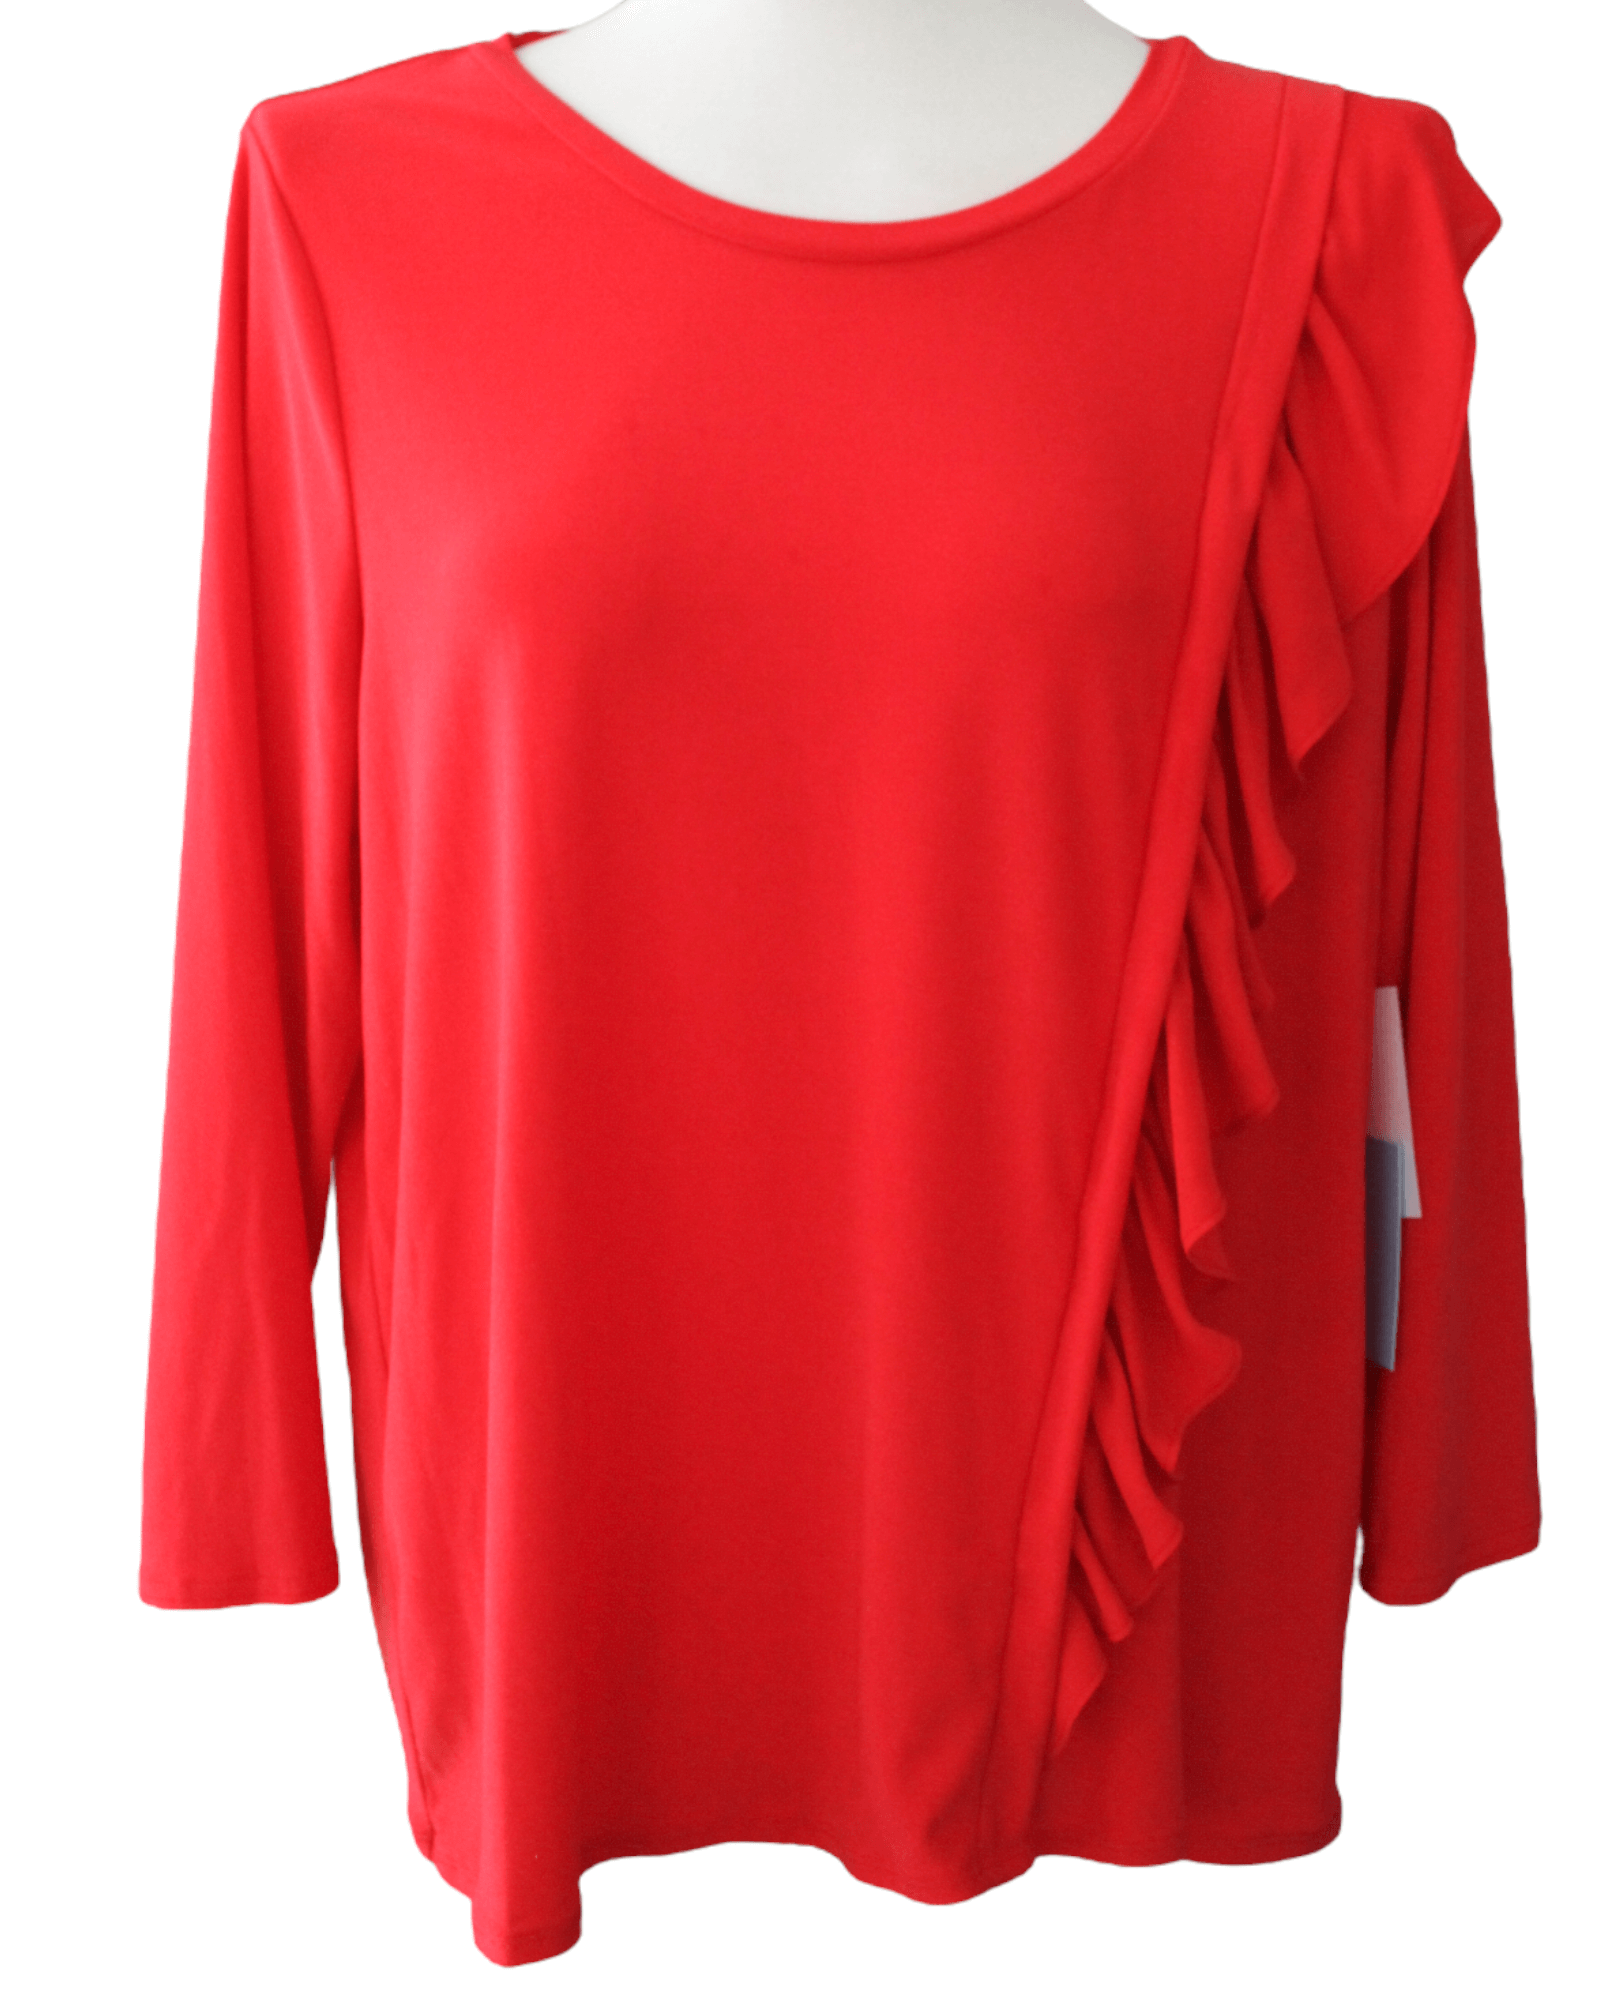 Bright Spring magma red ruffle top